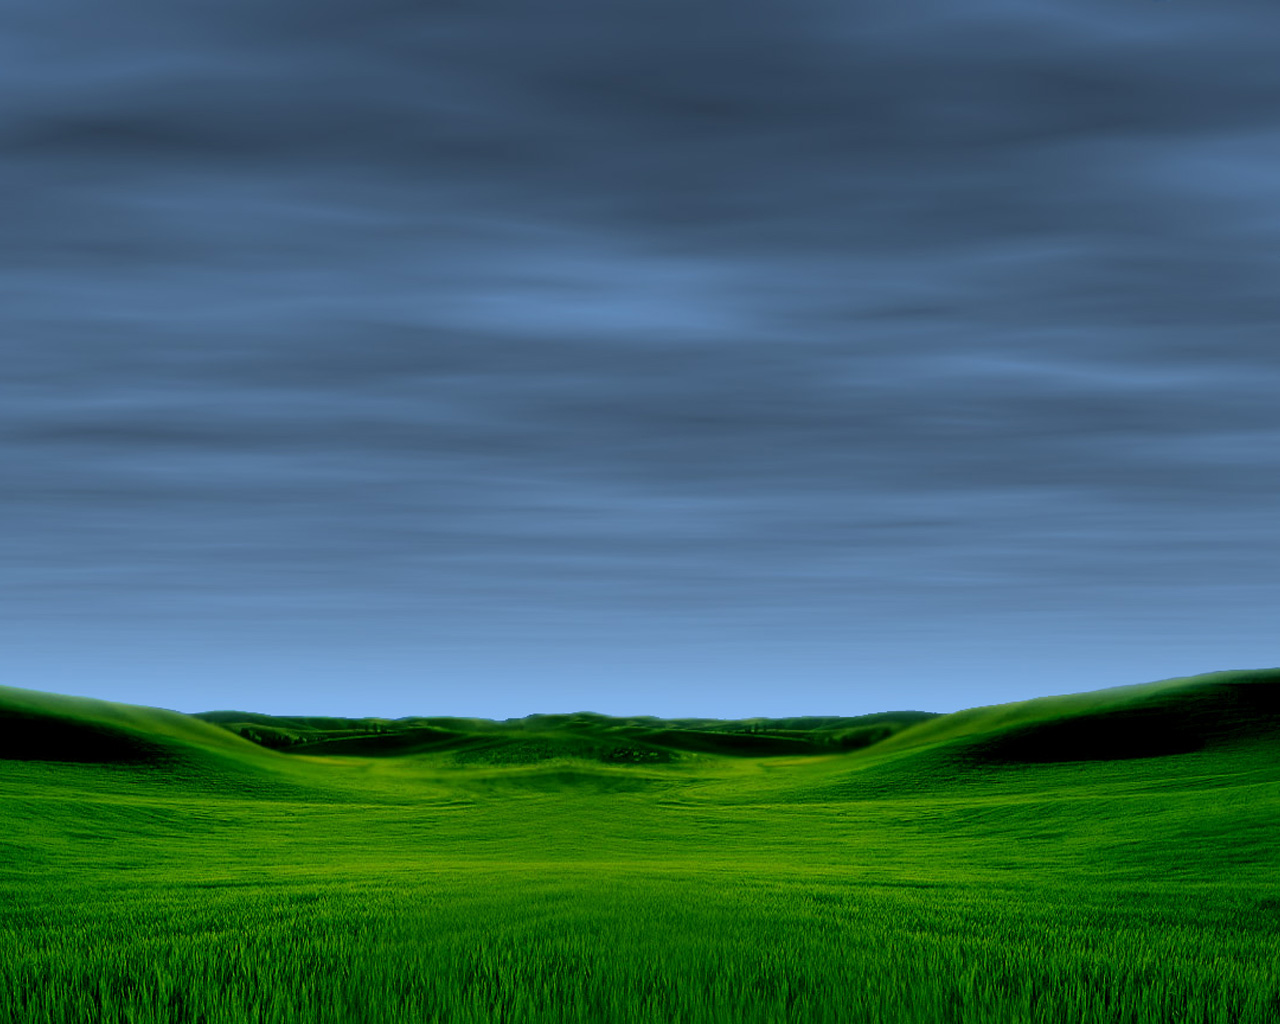 Xp themes wallpapers - images - tbwnz.com